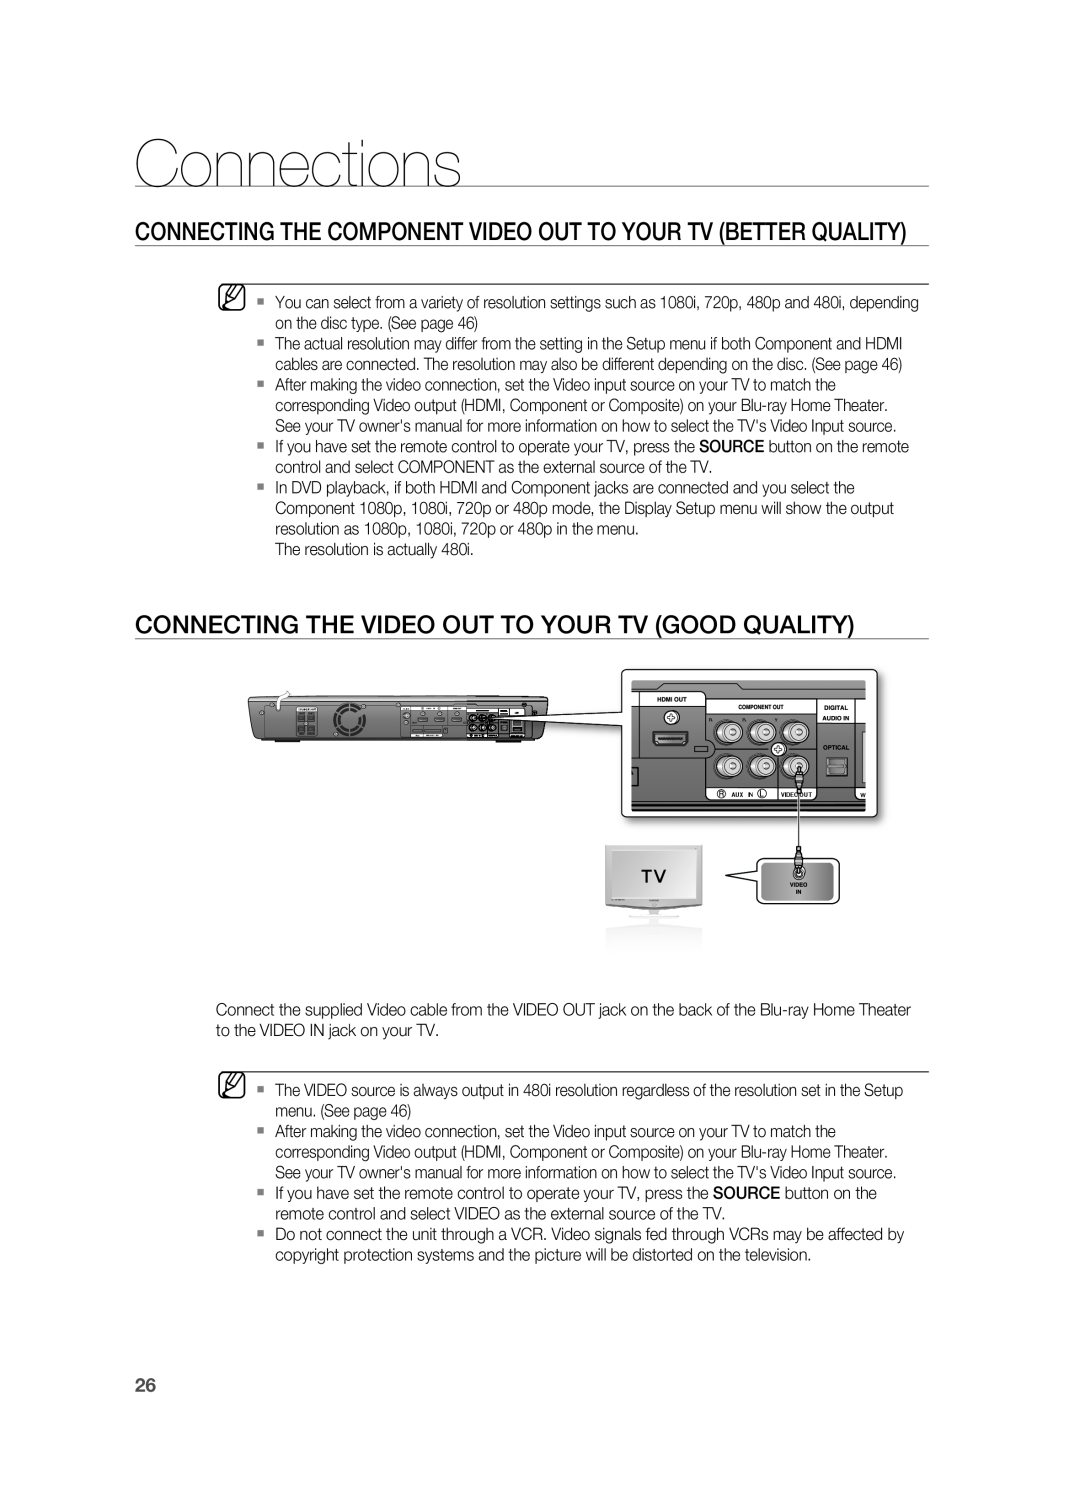 Samsung AH68-02231A, HT-BD3252A user manual Connecting The Video Out To Your Tv Good Quality, Connections 